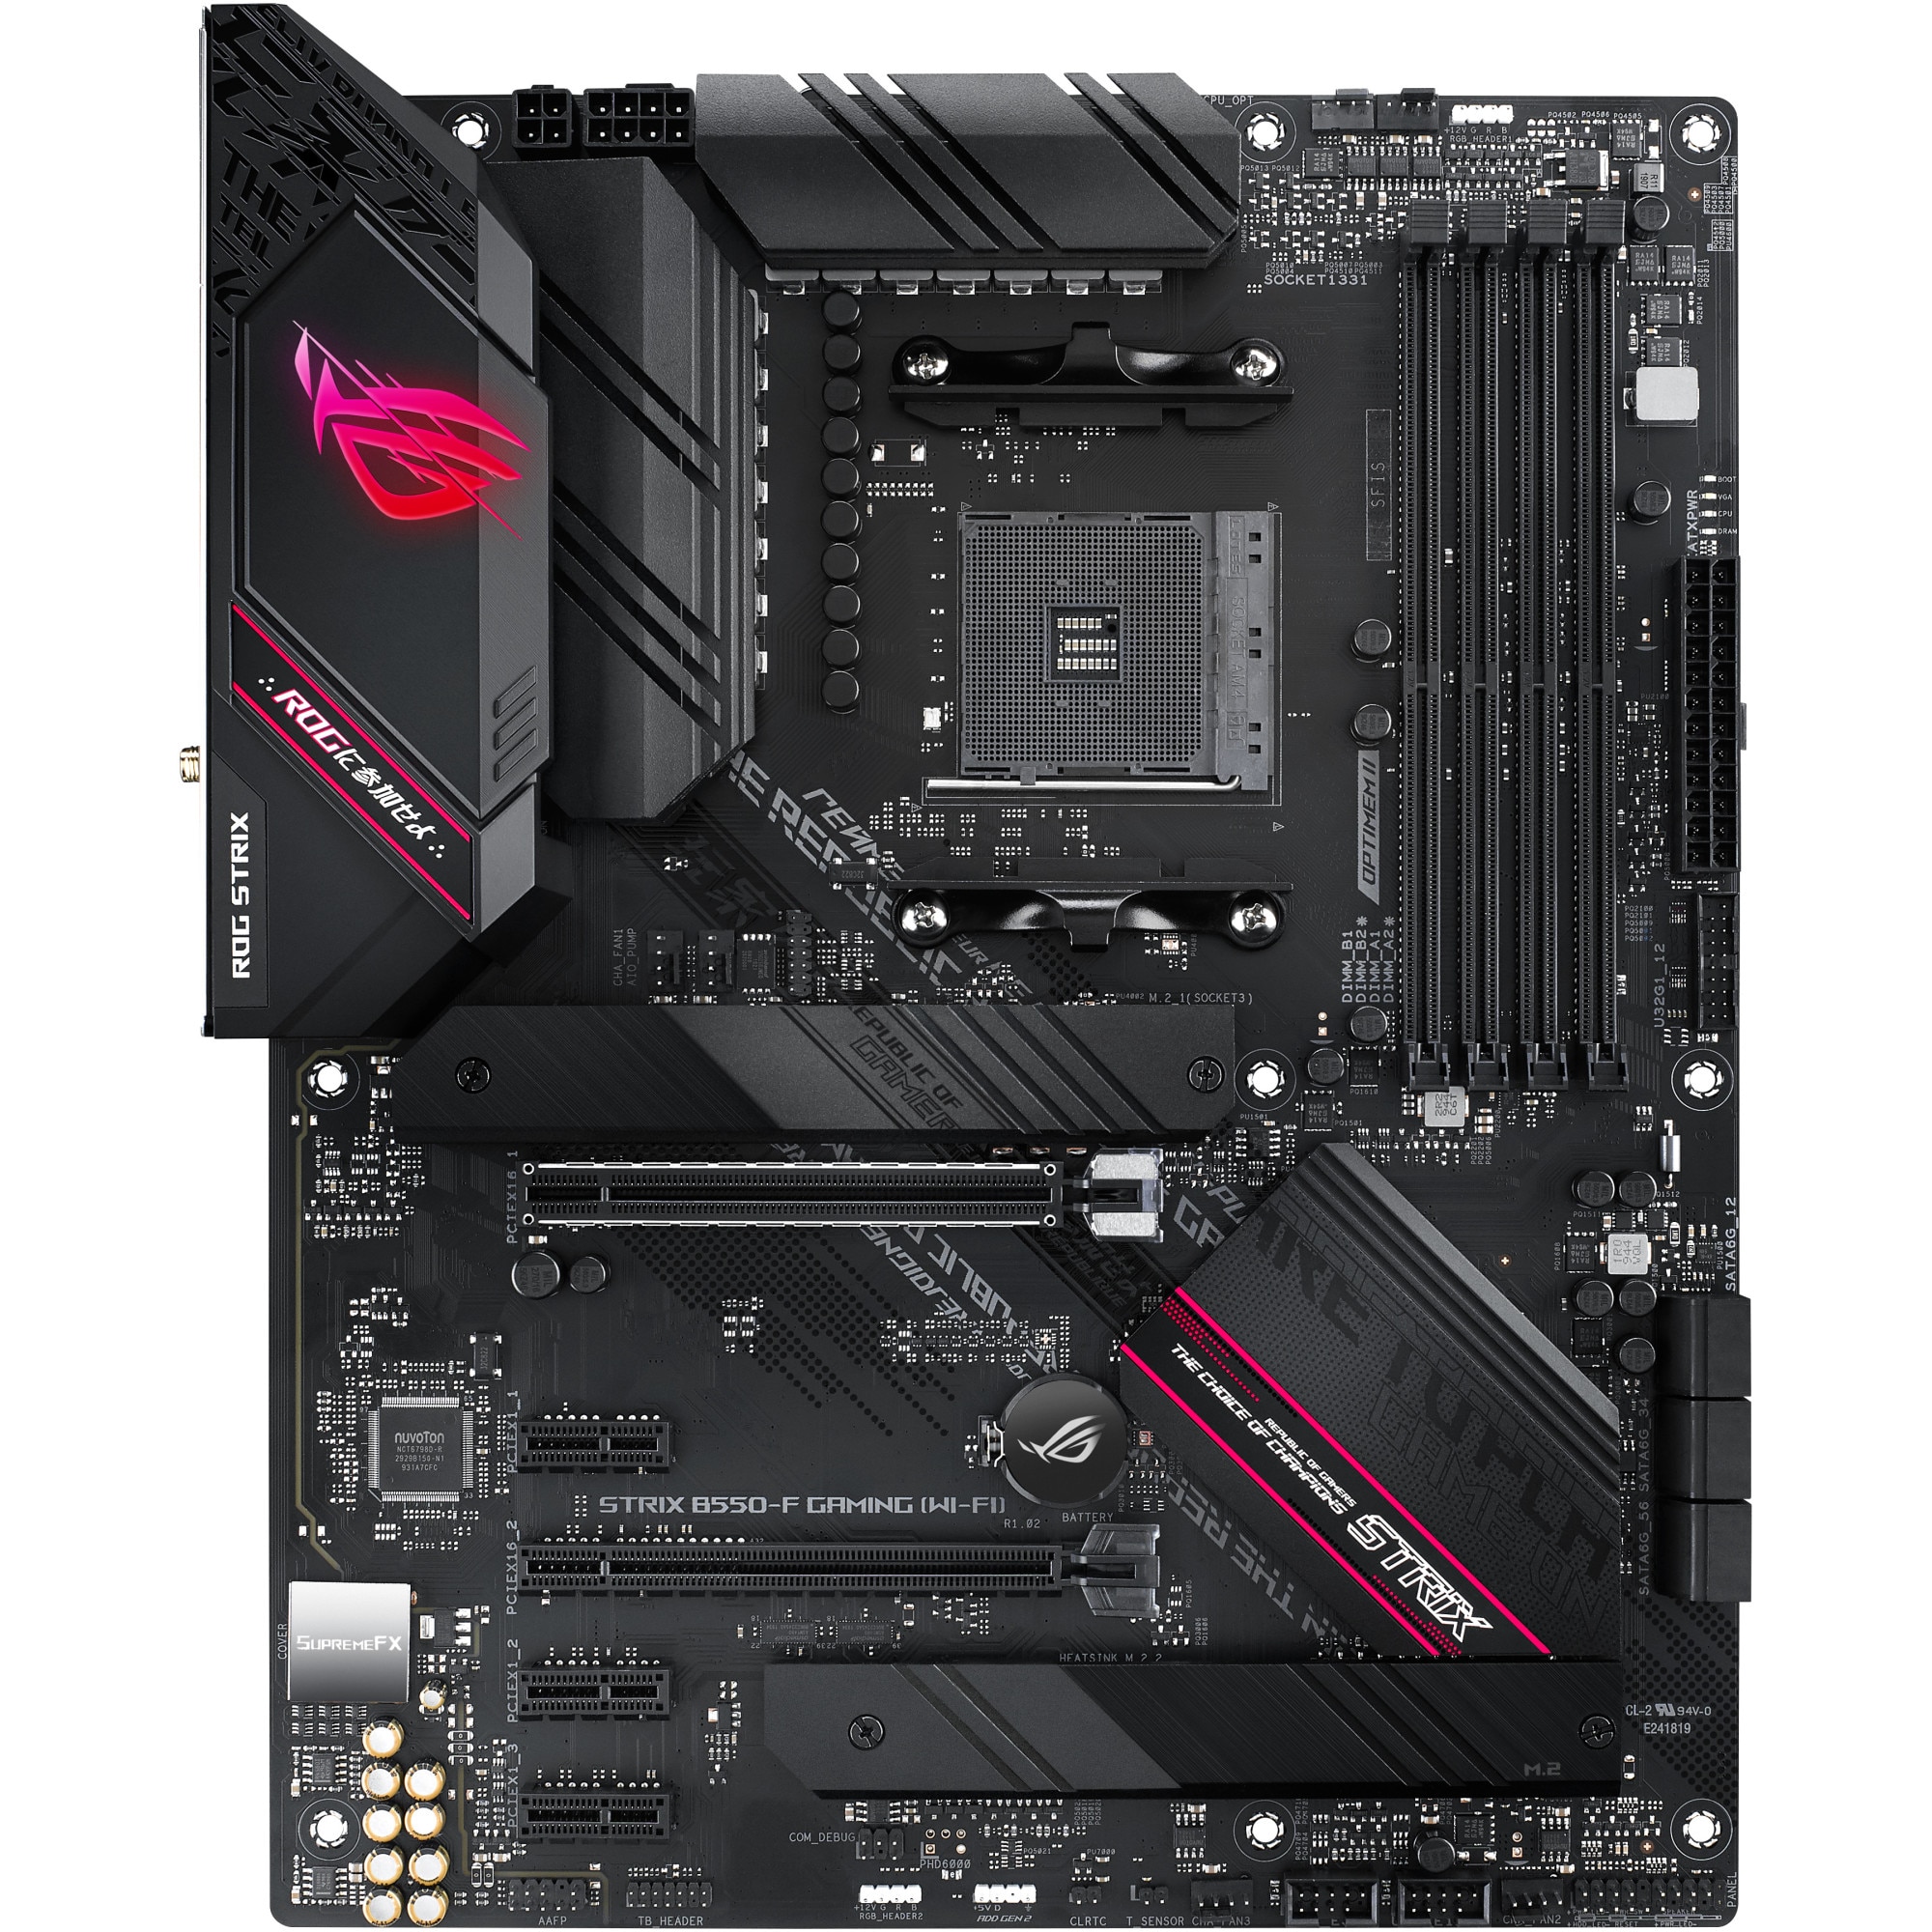 Outlaw Store In fact Placa de baza ASUS ROG STRIX B550-F GAMING(WI-FI), Socket AM4 - eMAG.ro